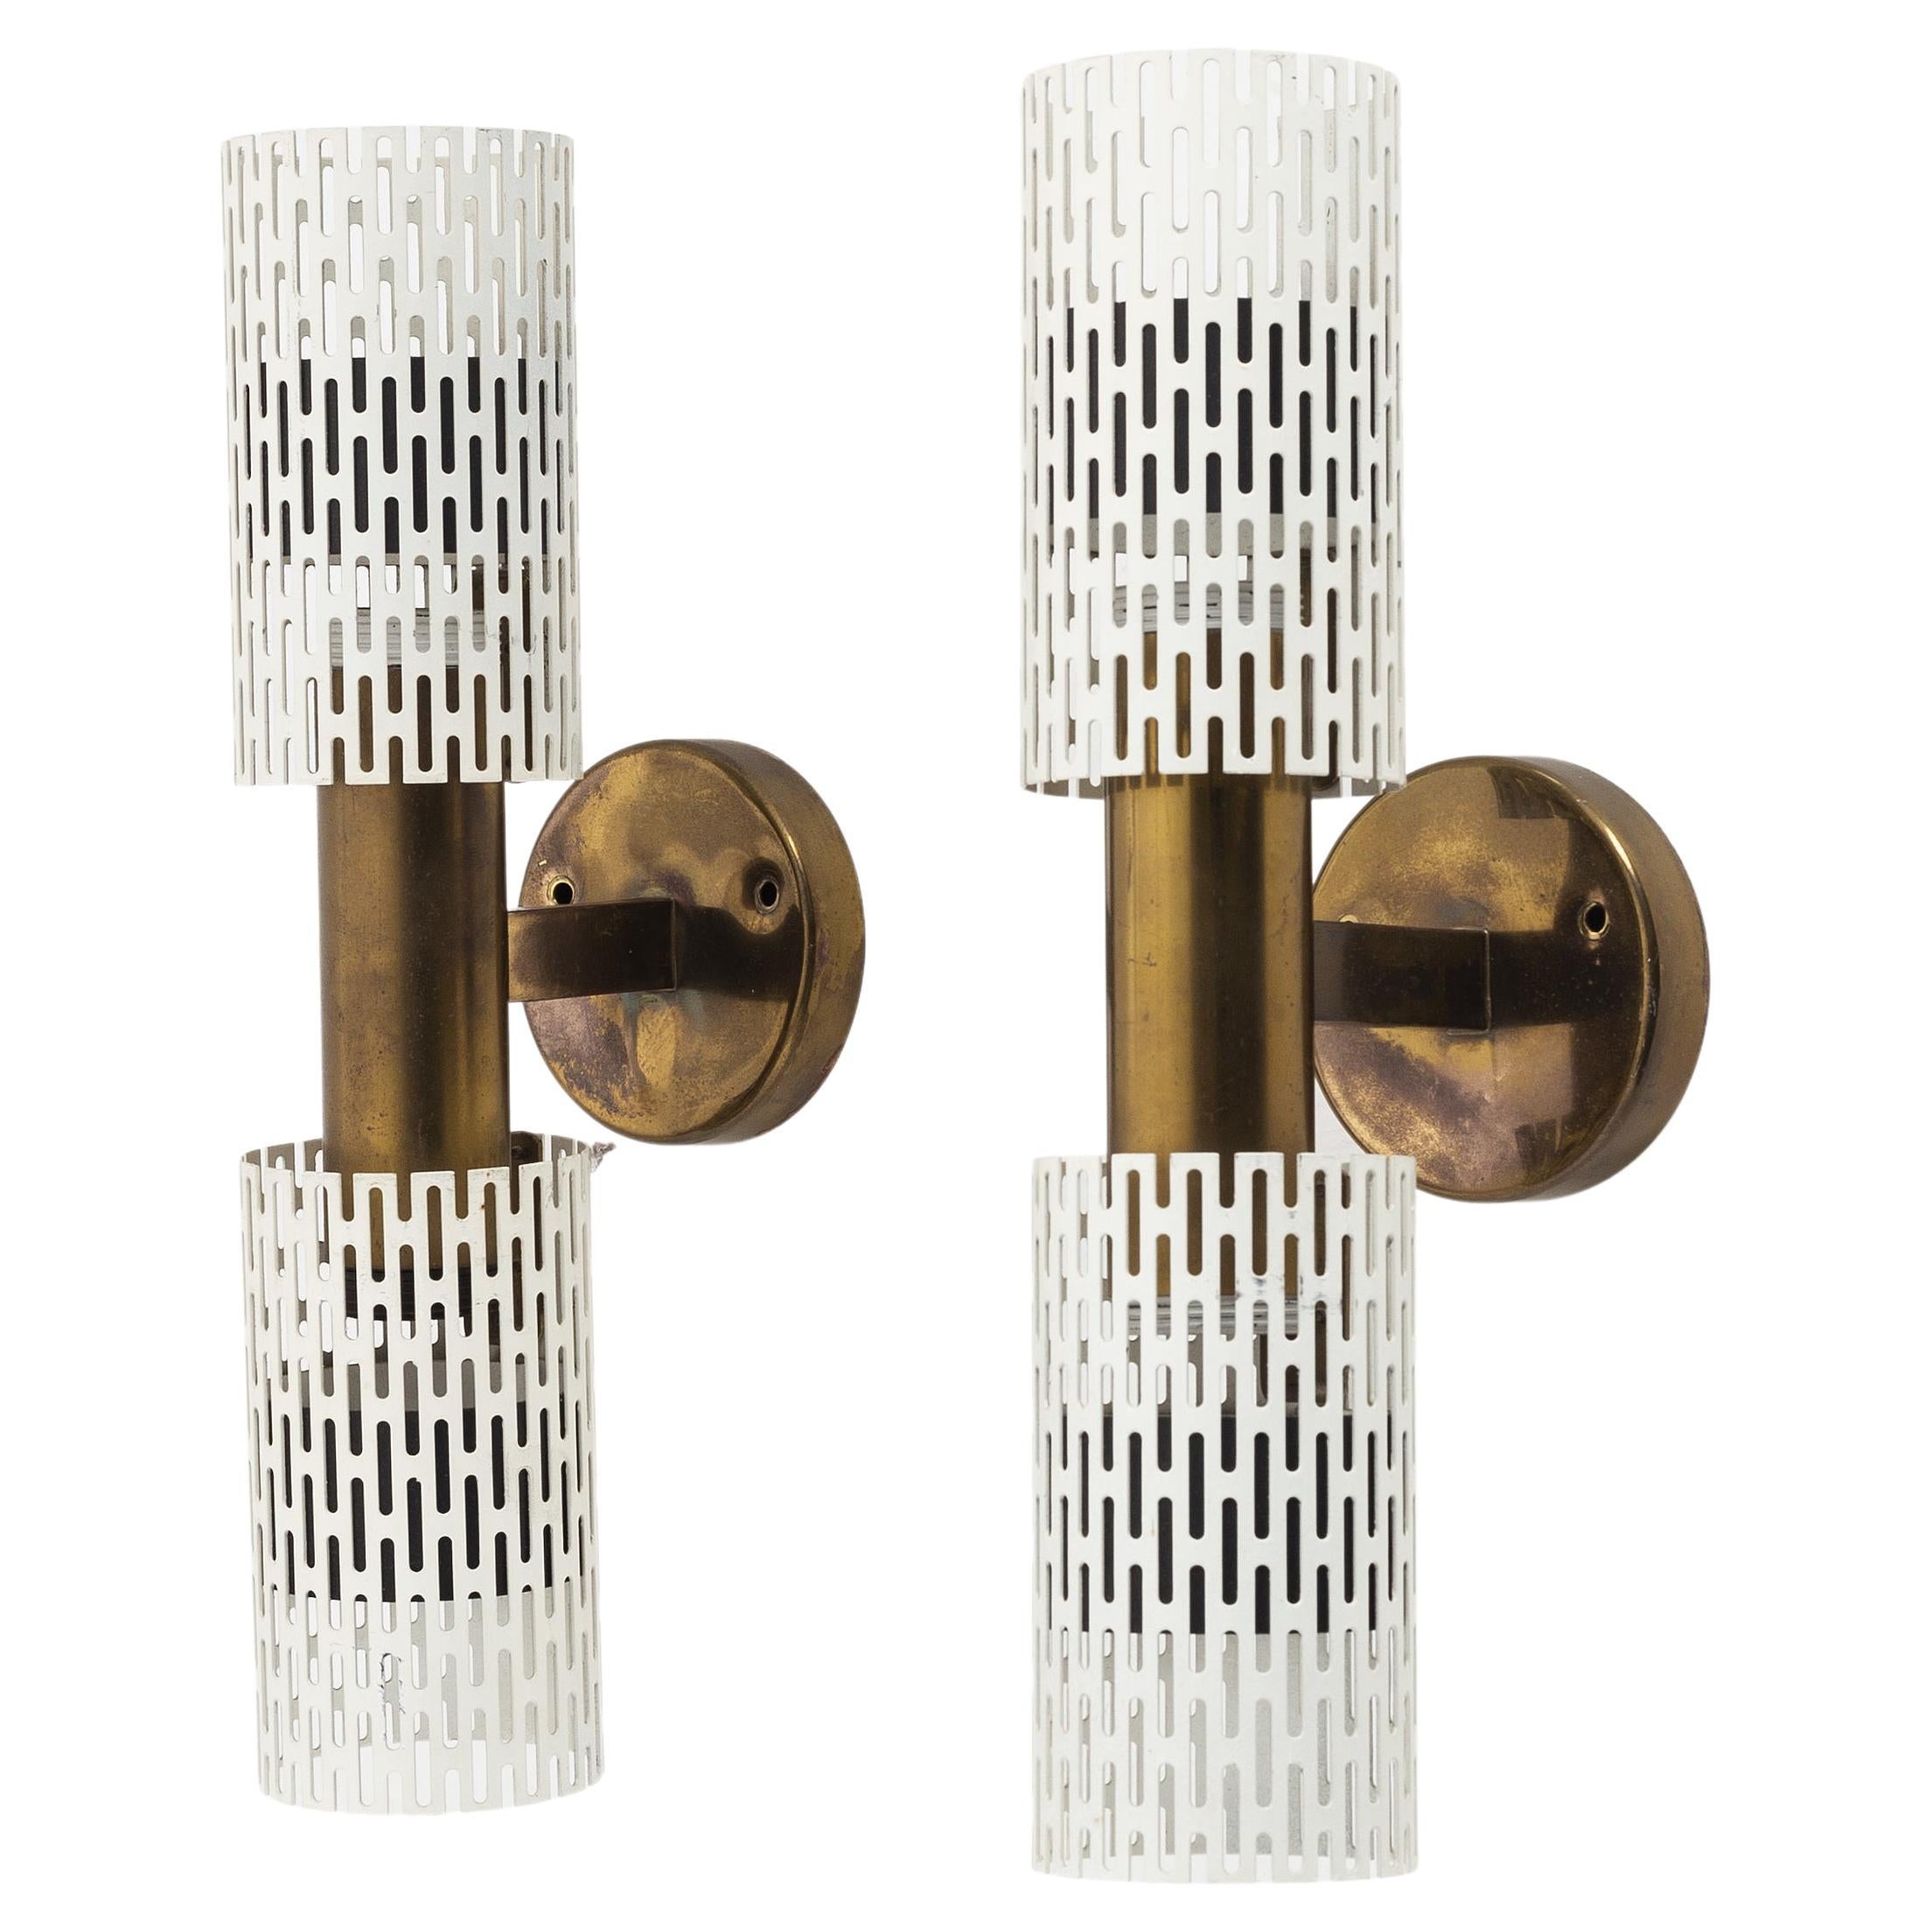 Harald Notini Rare Pair of Sconces Model 11262 for Bohlmarks, 1950 For Sale